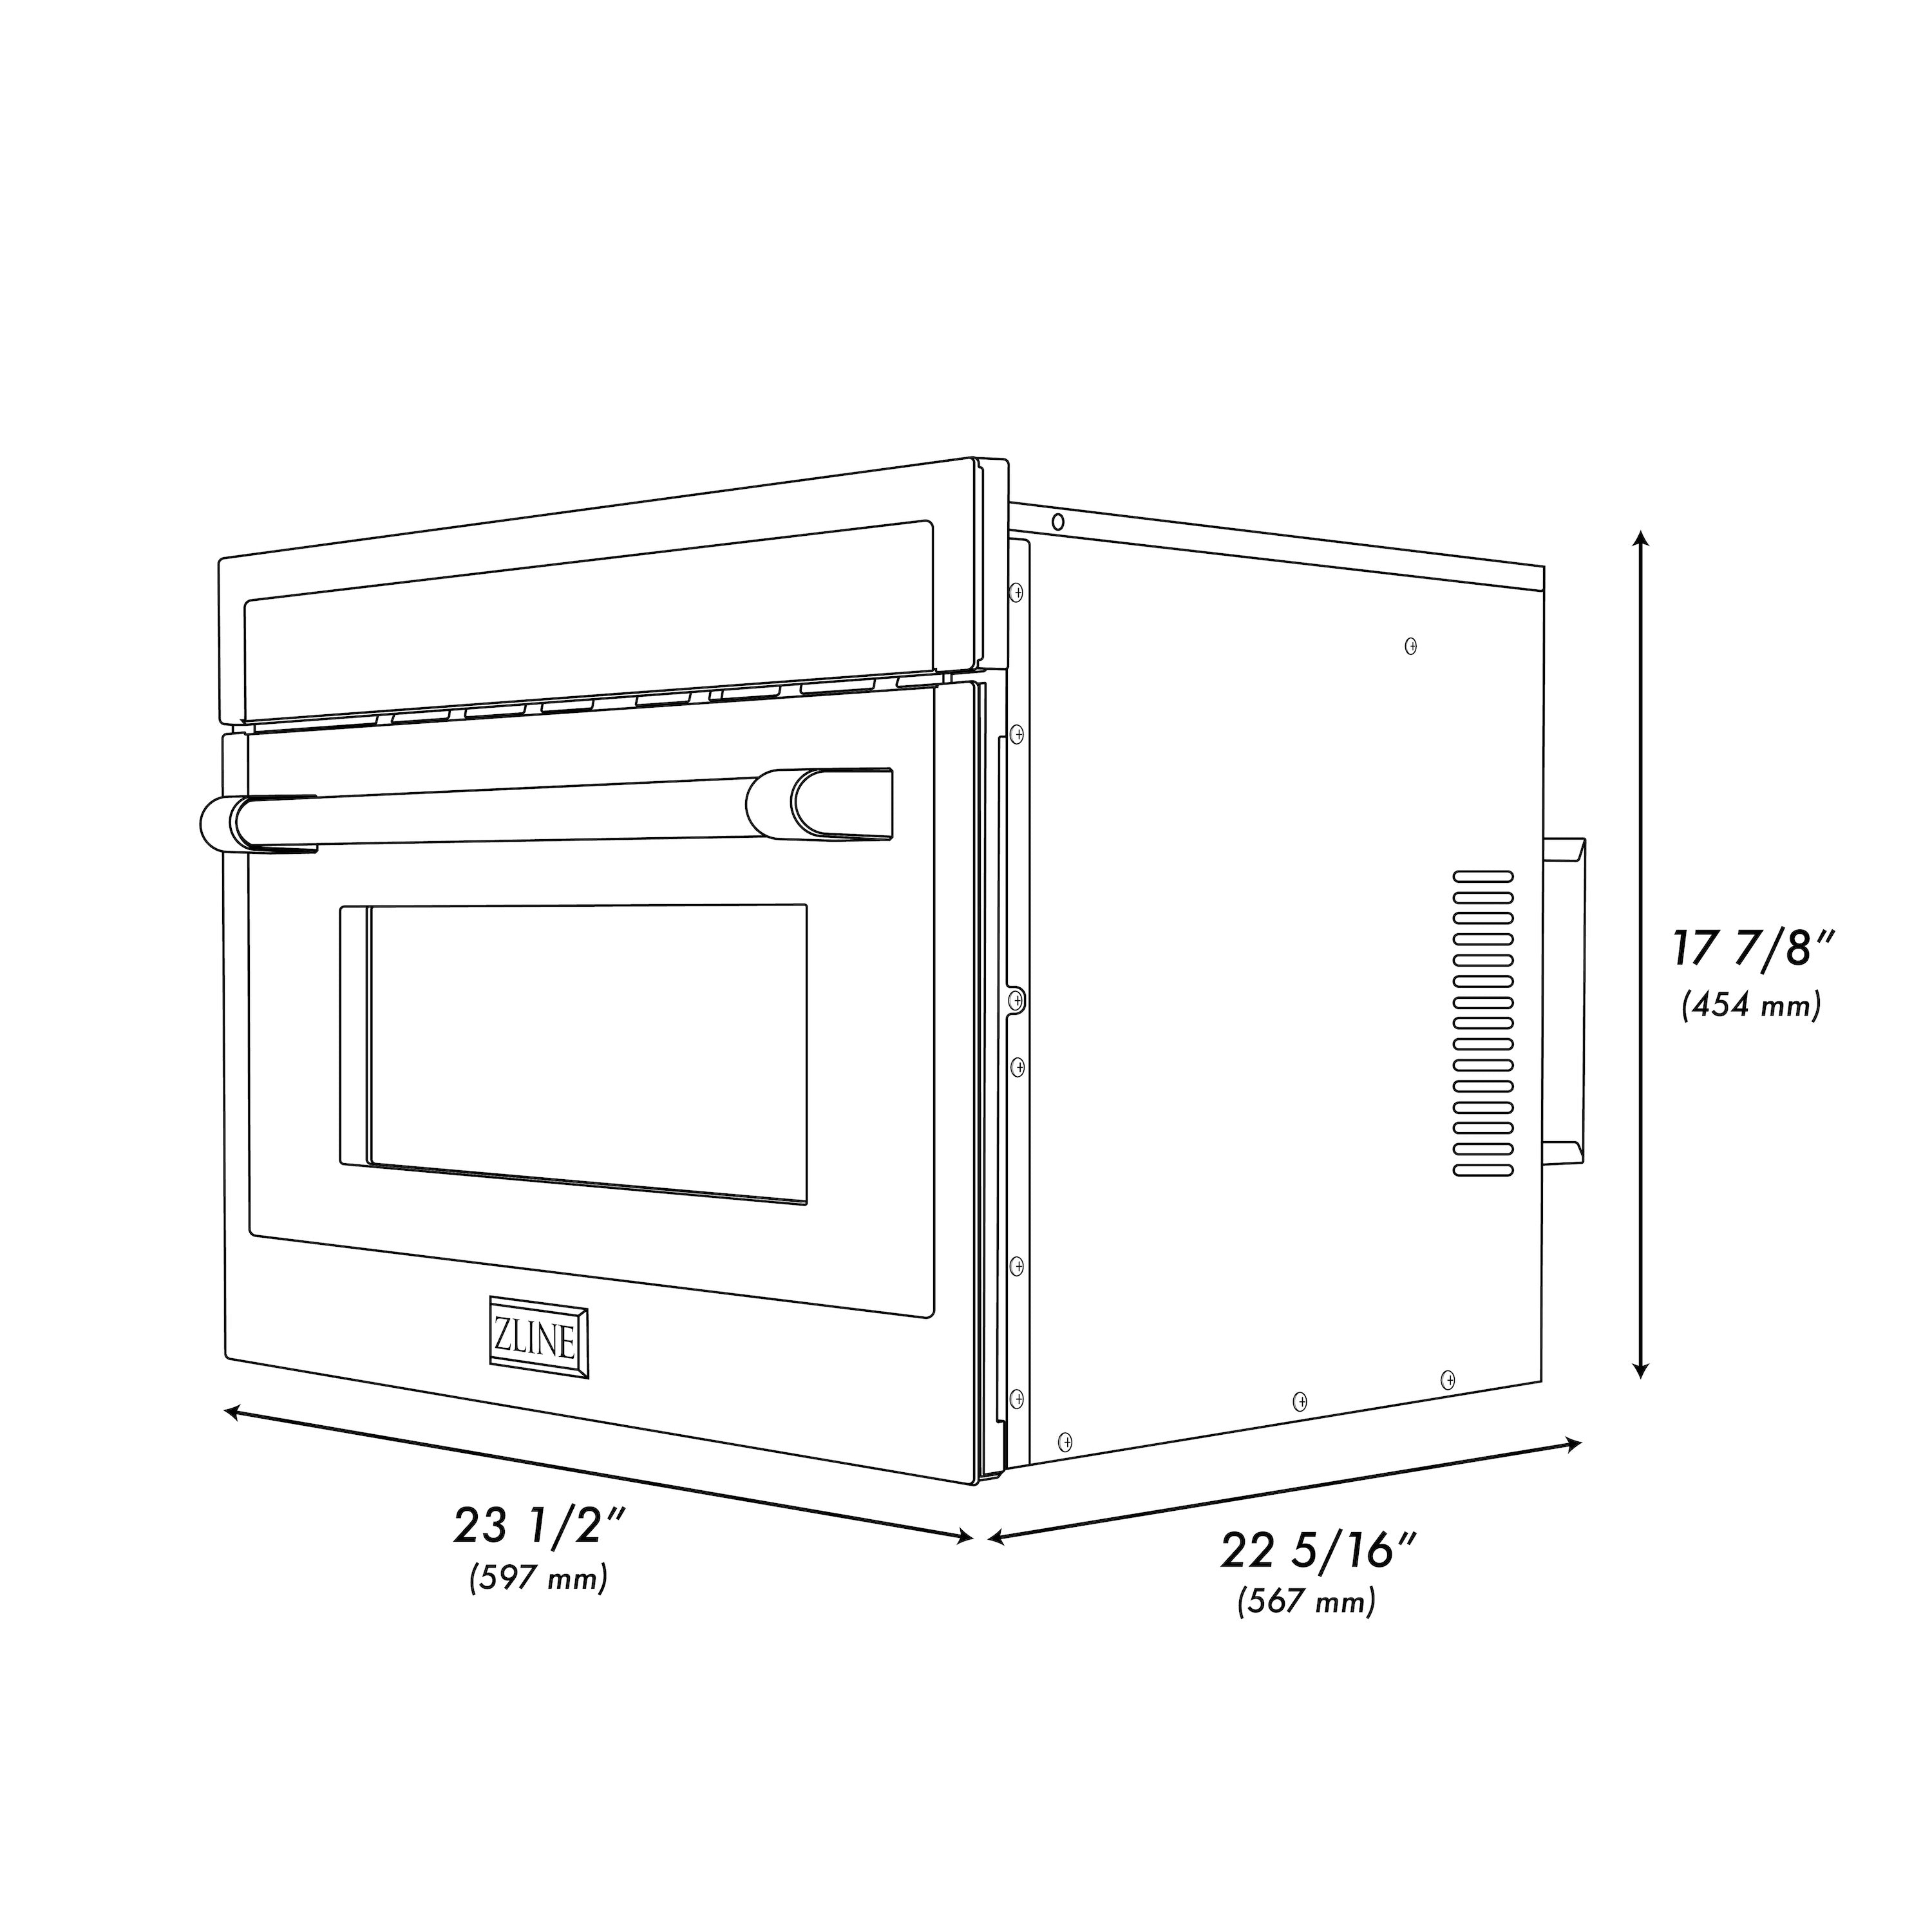 ZLINE 24 in. Built-in Convection Microwave Oven in Fingerprint Resistant Stainless Steel (MWO-24-SS) dimensional diagram with measurements.